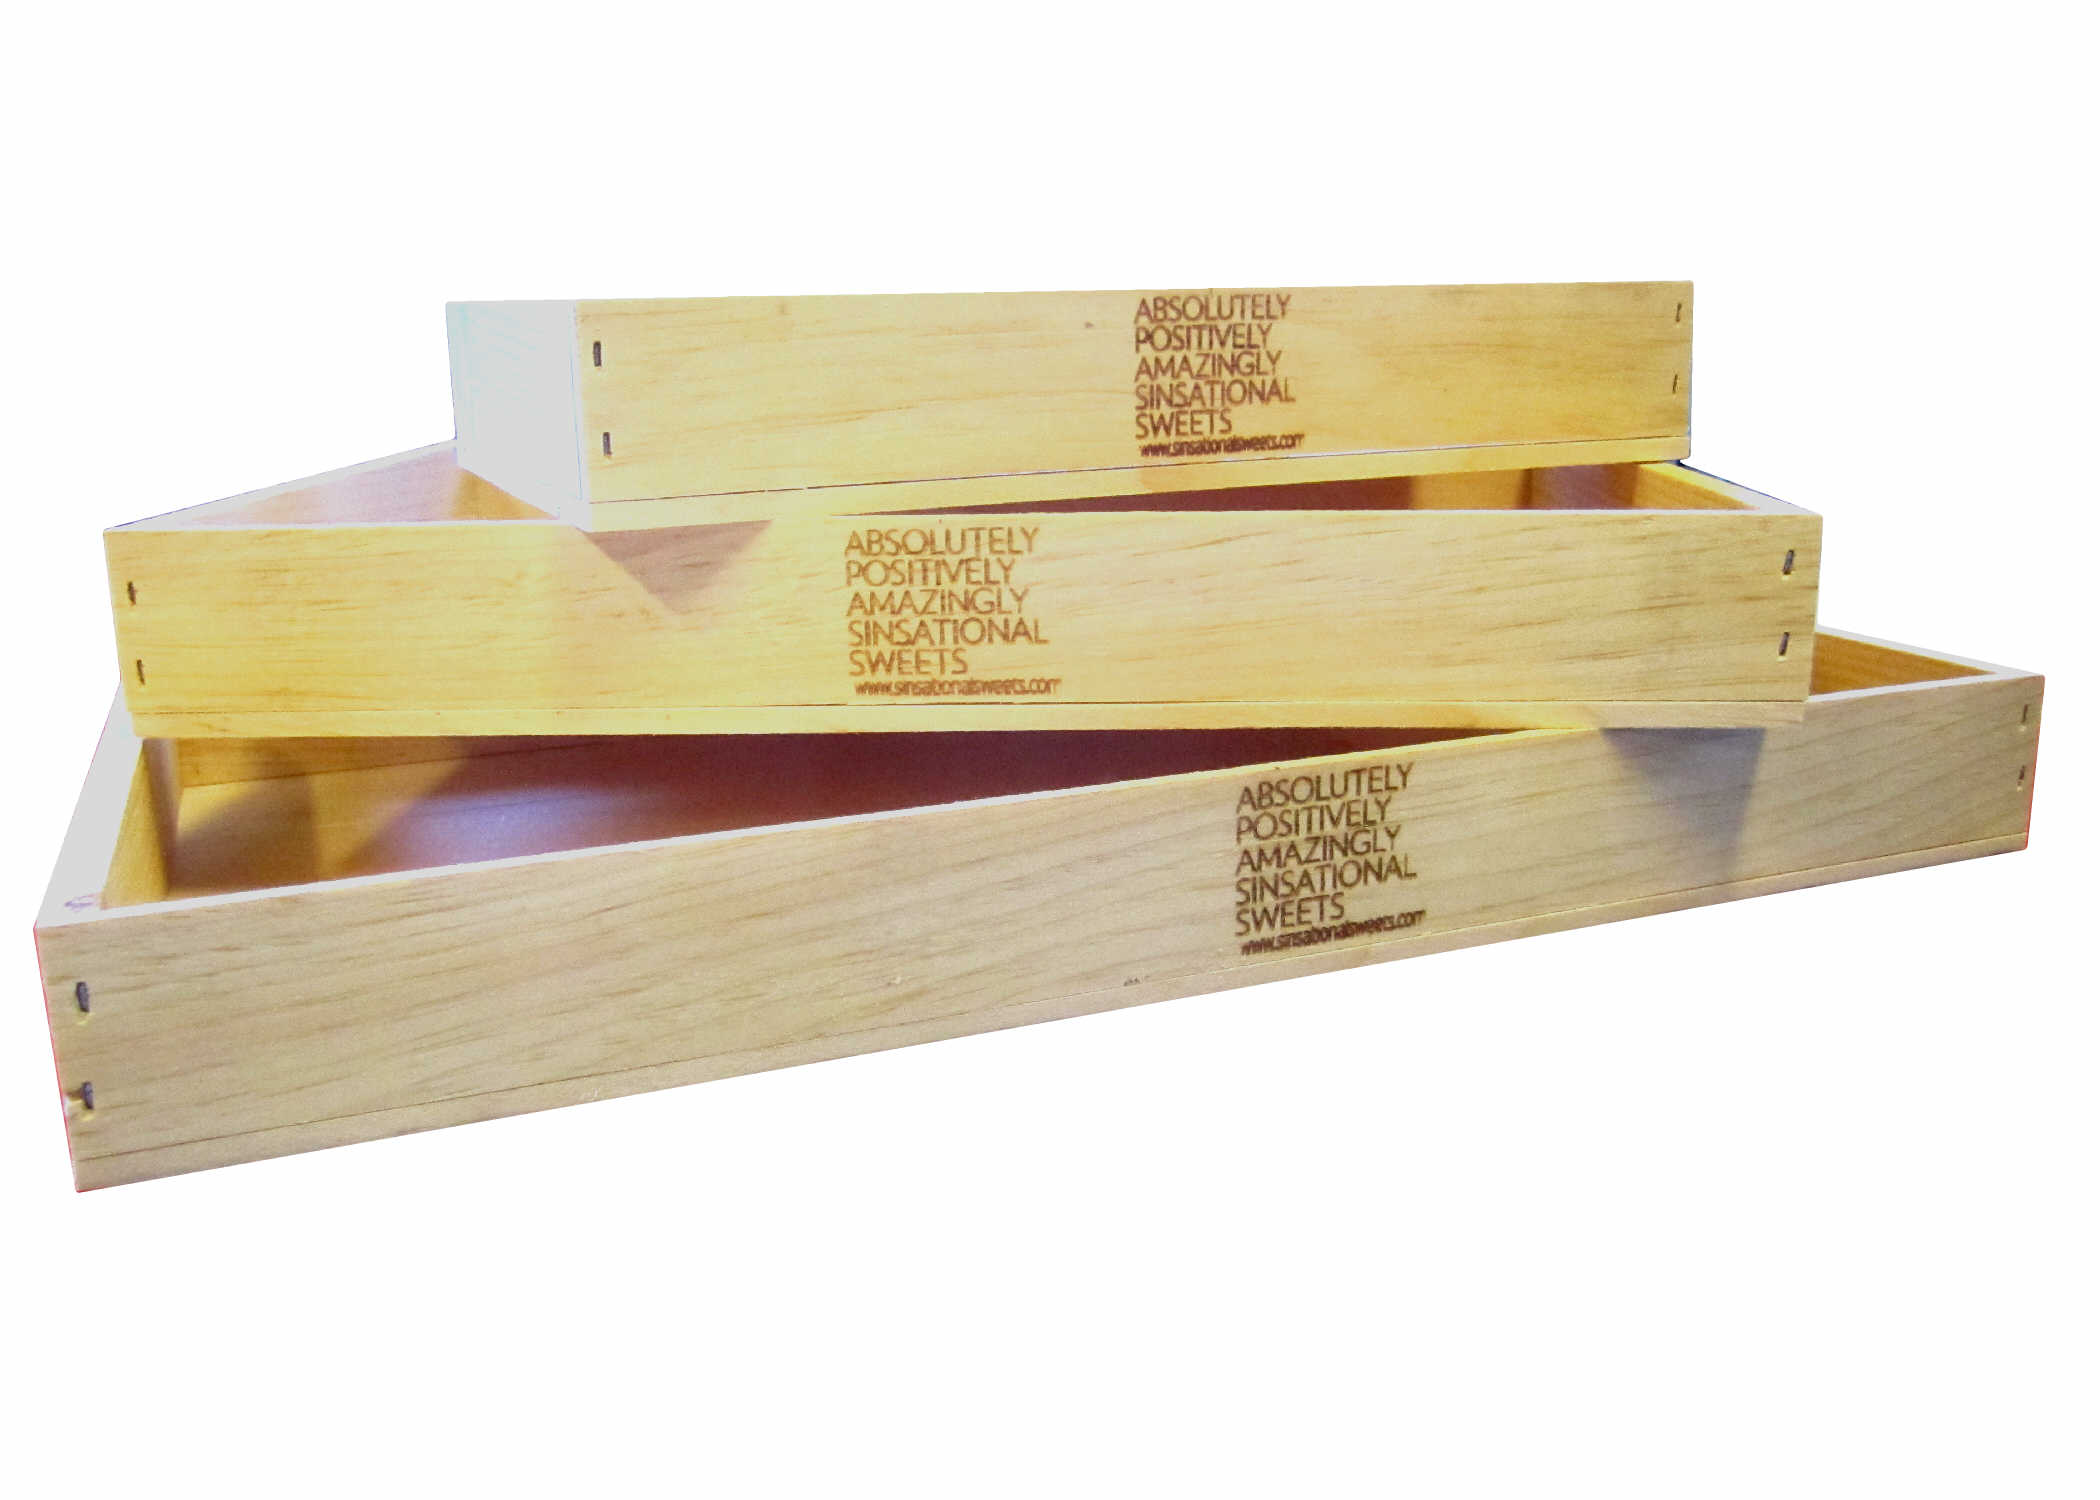 Custom wooden crates add value to your products.jpg